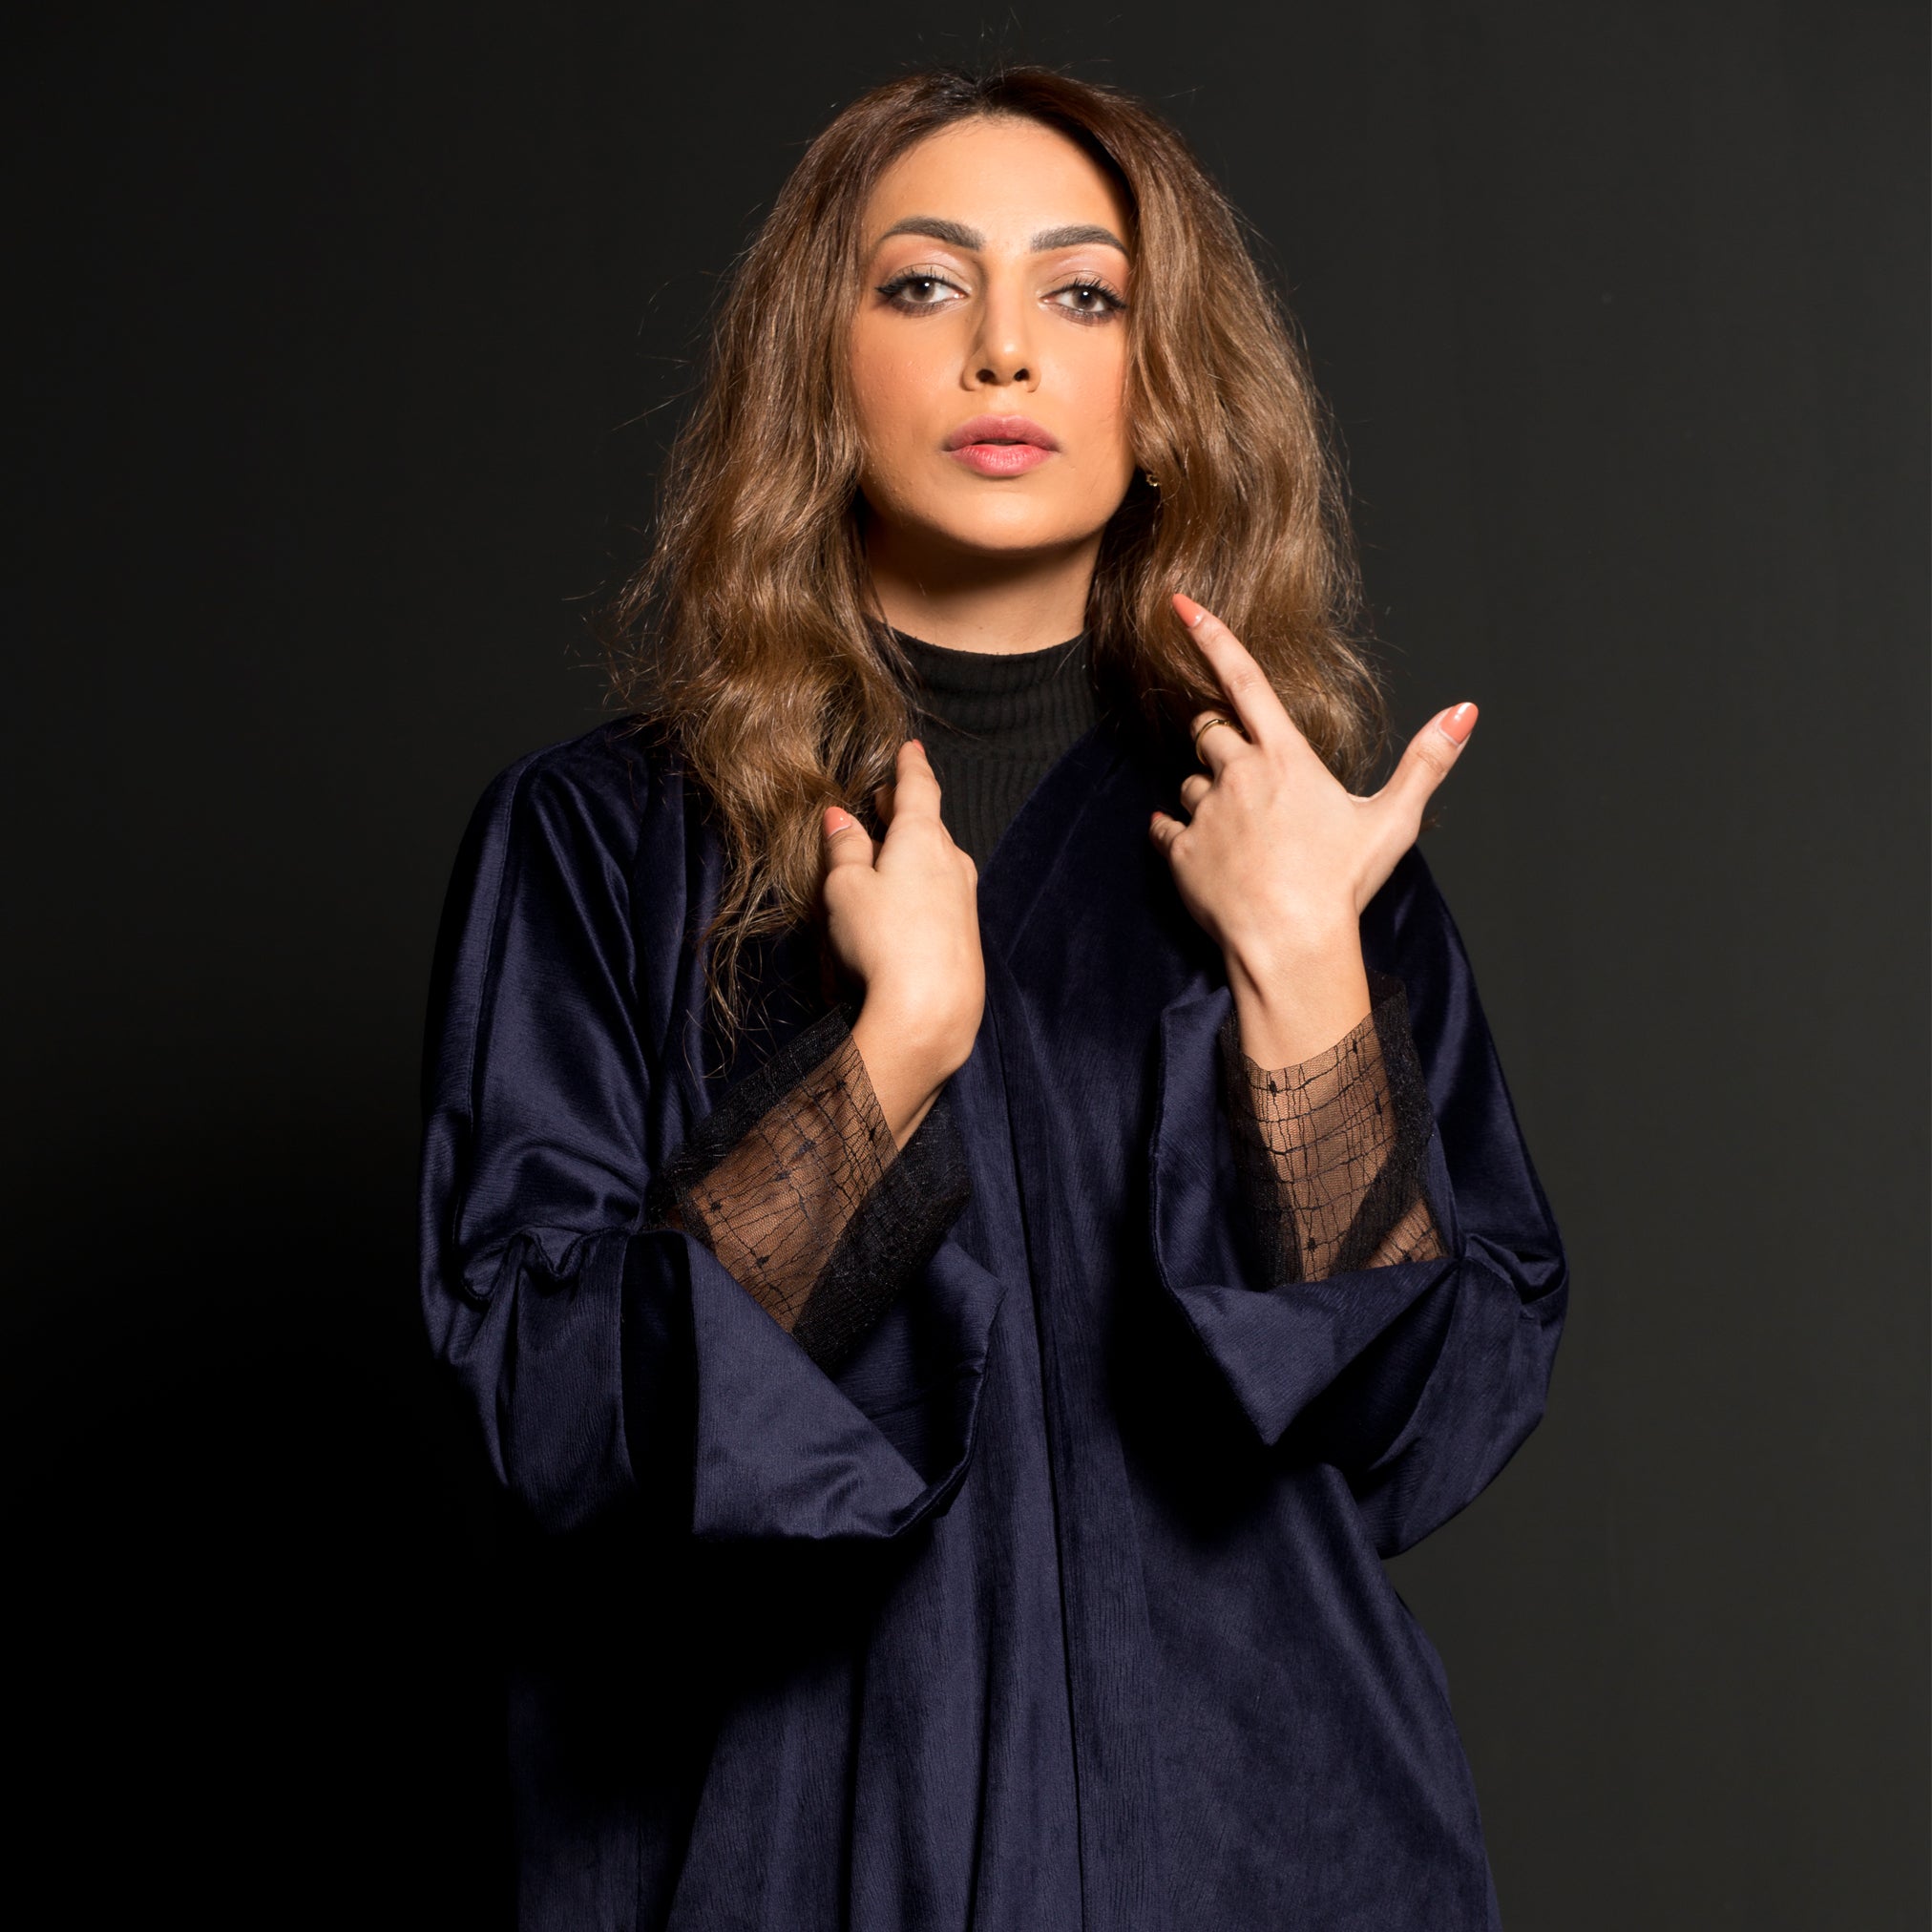 CL-0157 Winter abaya, classic model, navy blue velvet, with lace added in the sleeve